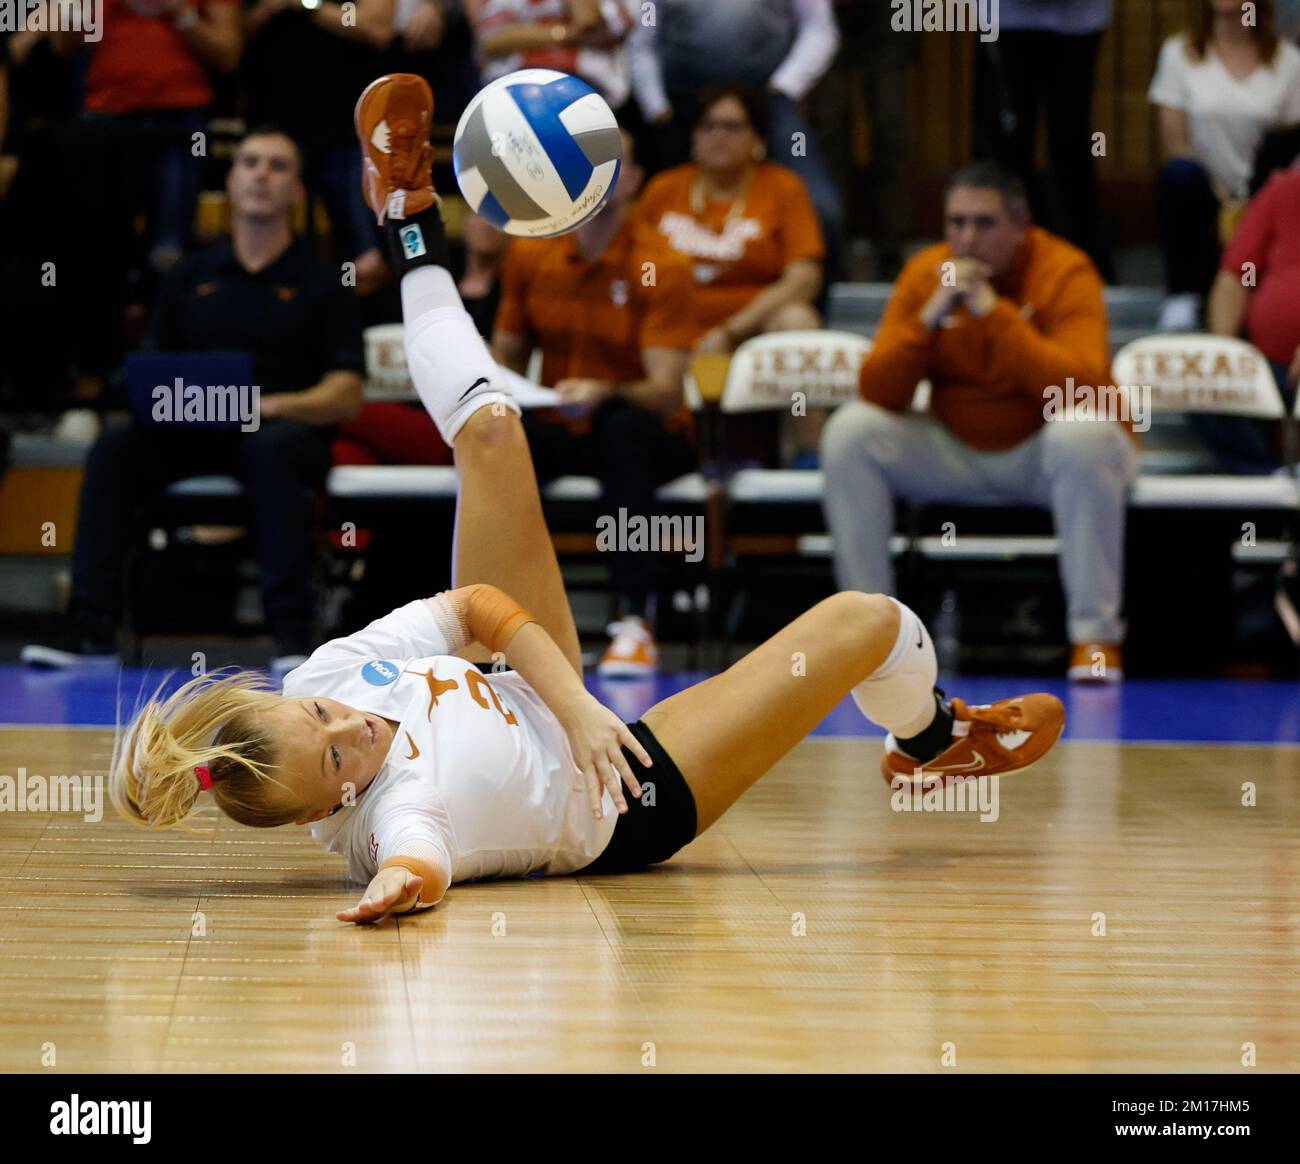 December 10, 2022 Texas libero EMMA HALTER (2) dives but misses the ball during the NCAA Womens Volleyball Tournament regional final between Texas and Ohio State on Dec